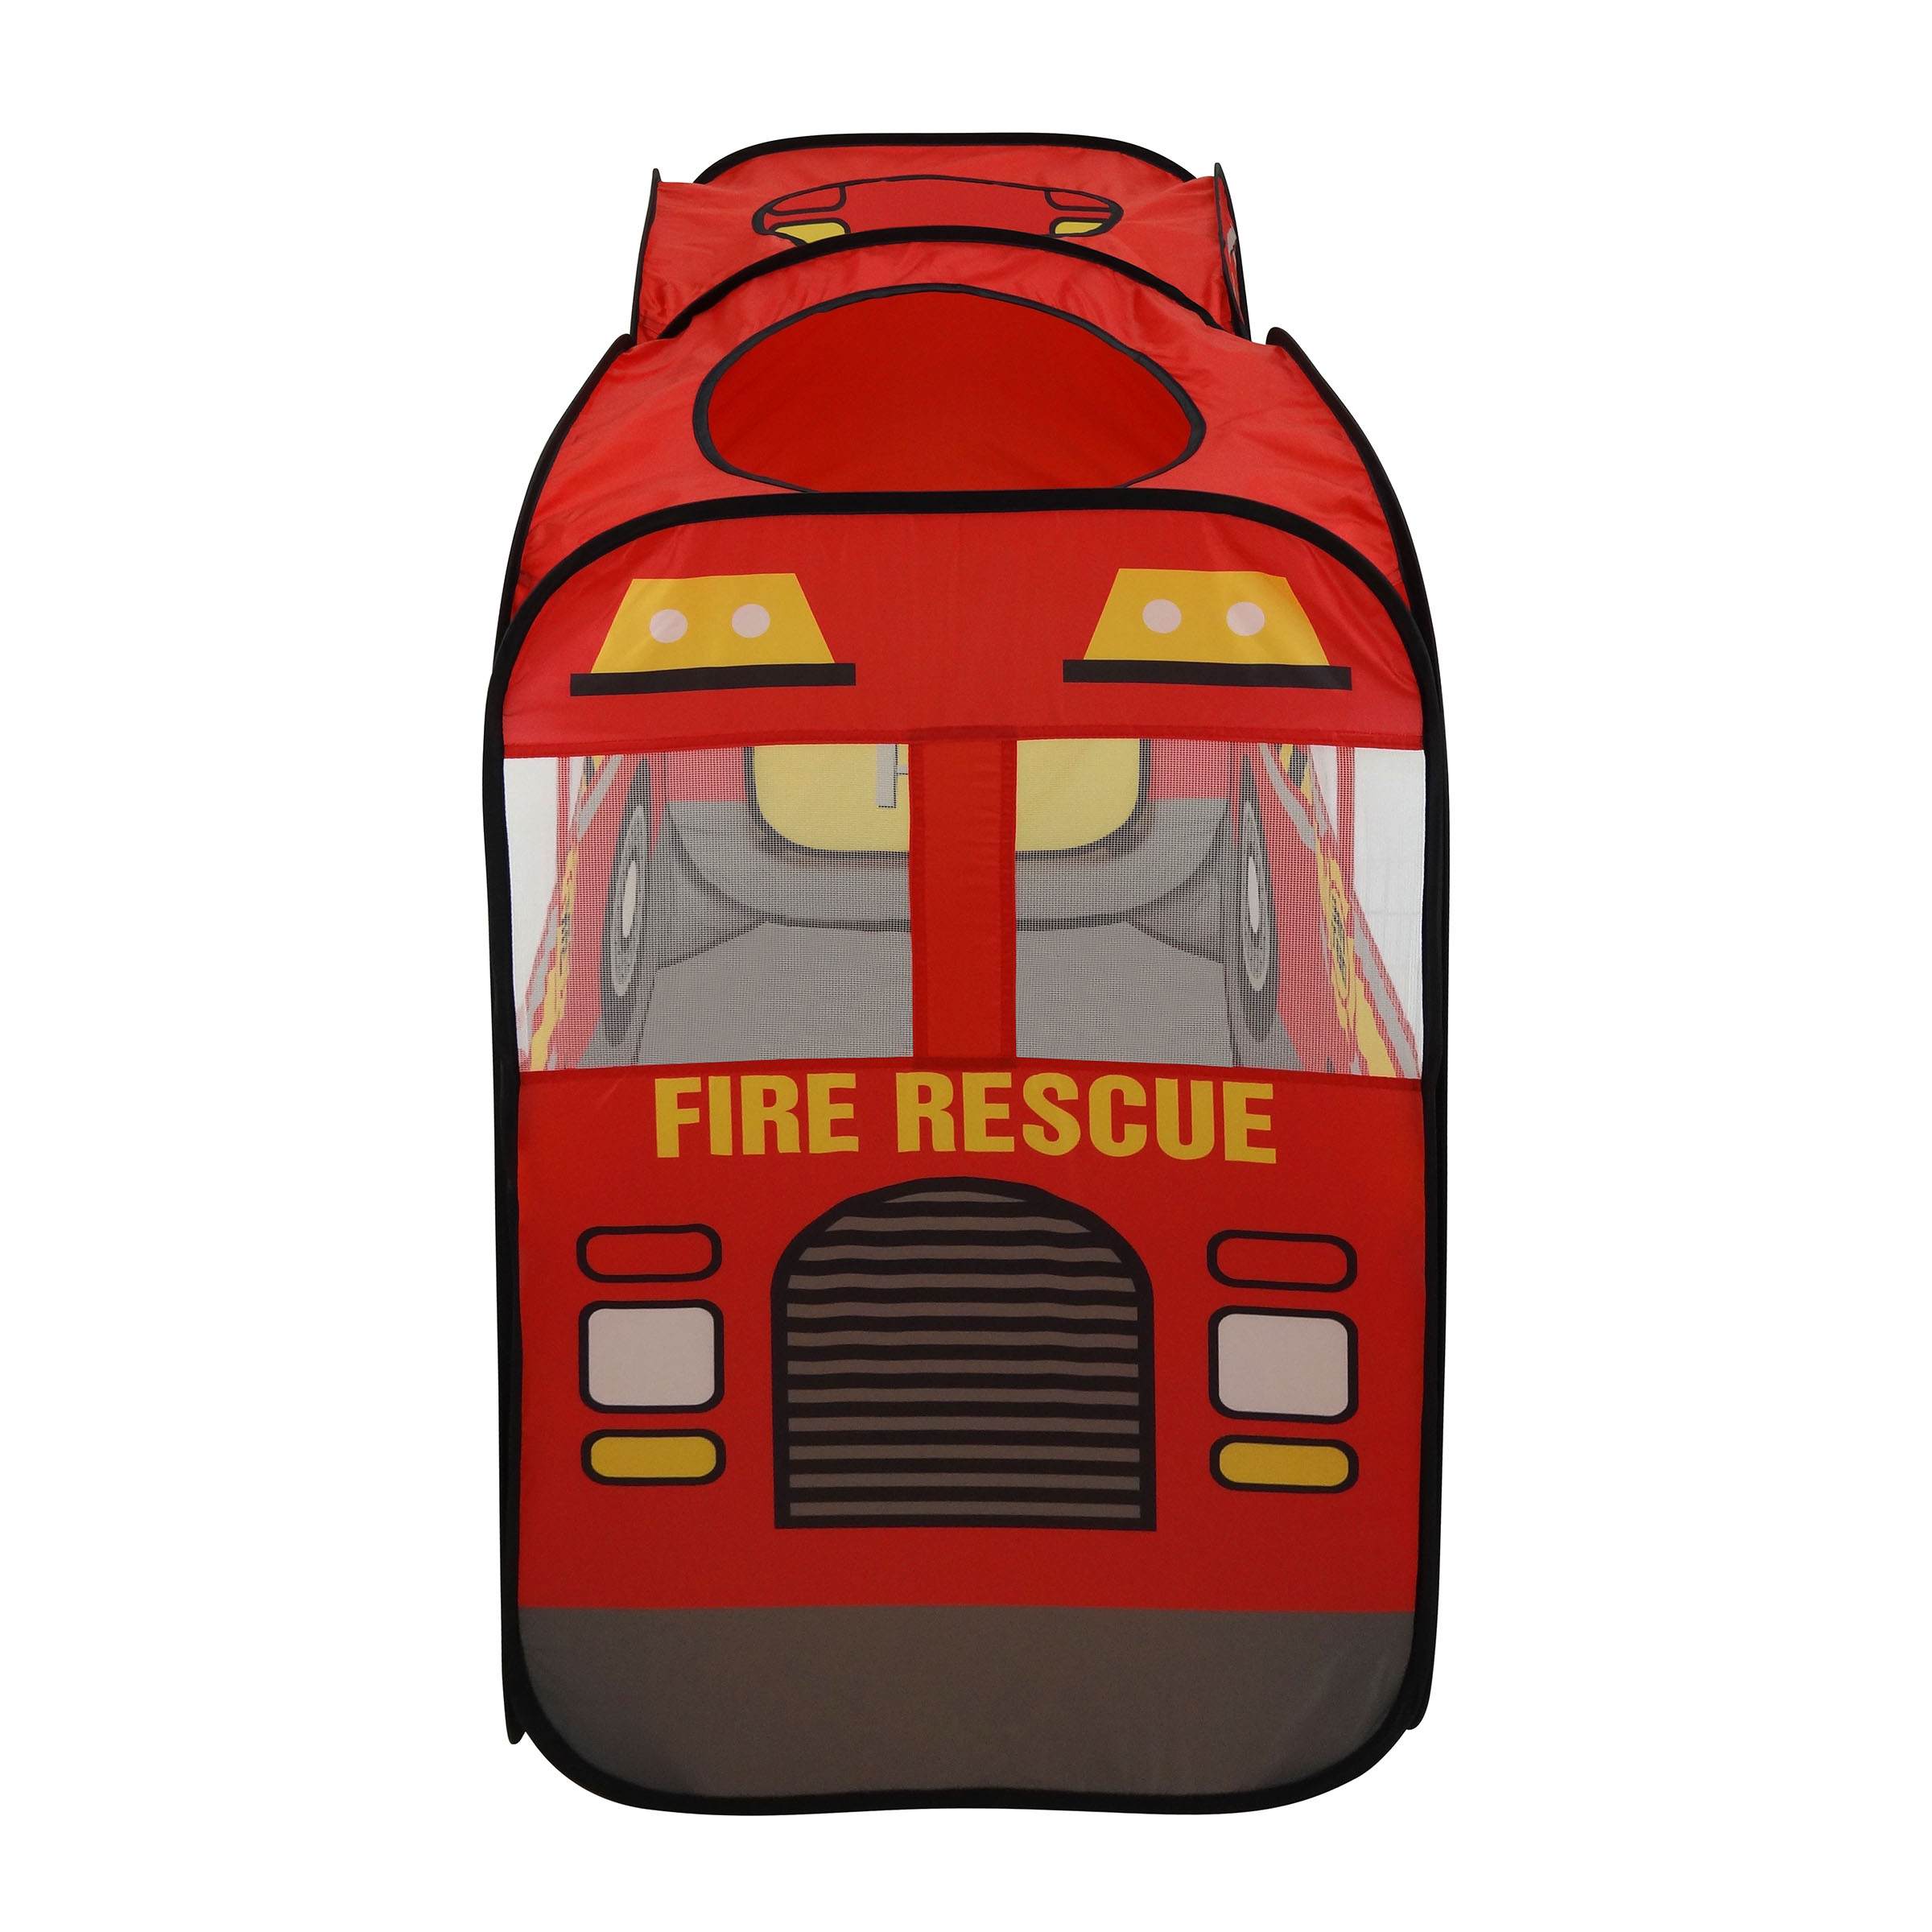 My First Fire Truck - image 2 of 7